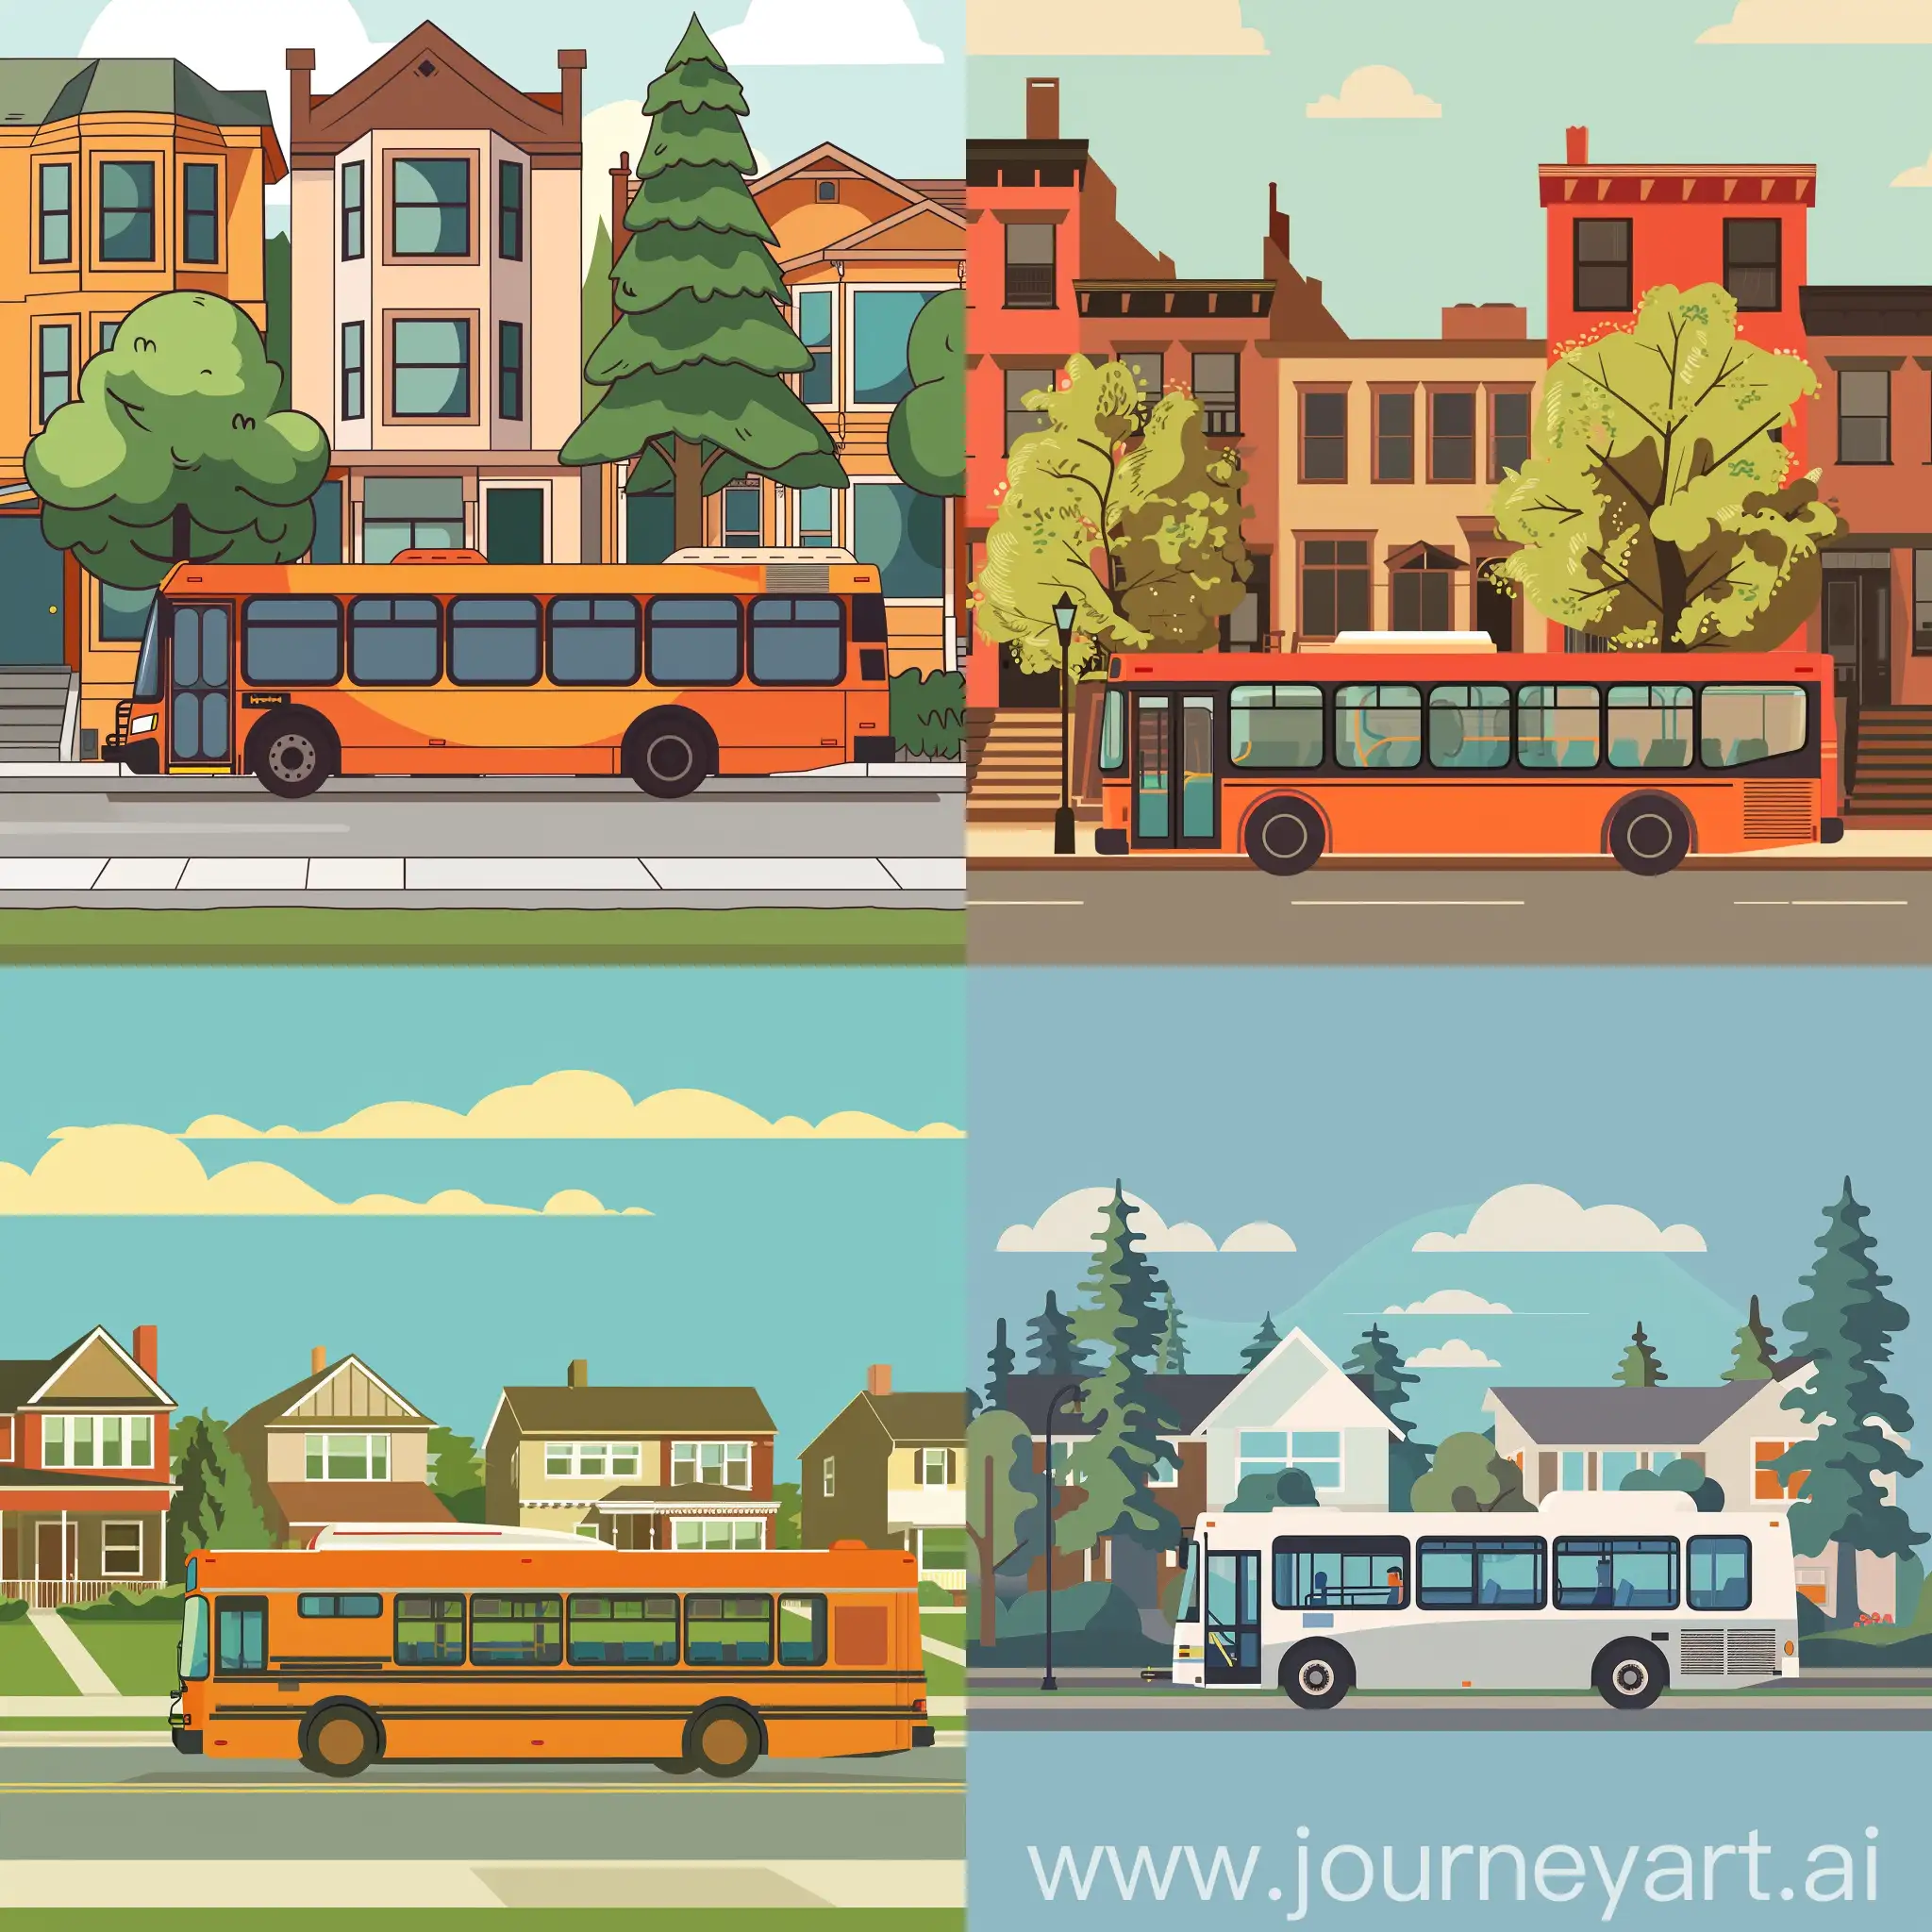 moving bus in a neighborhood
graphic
